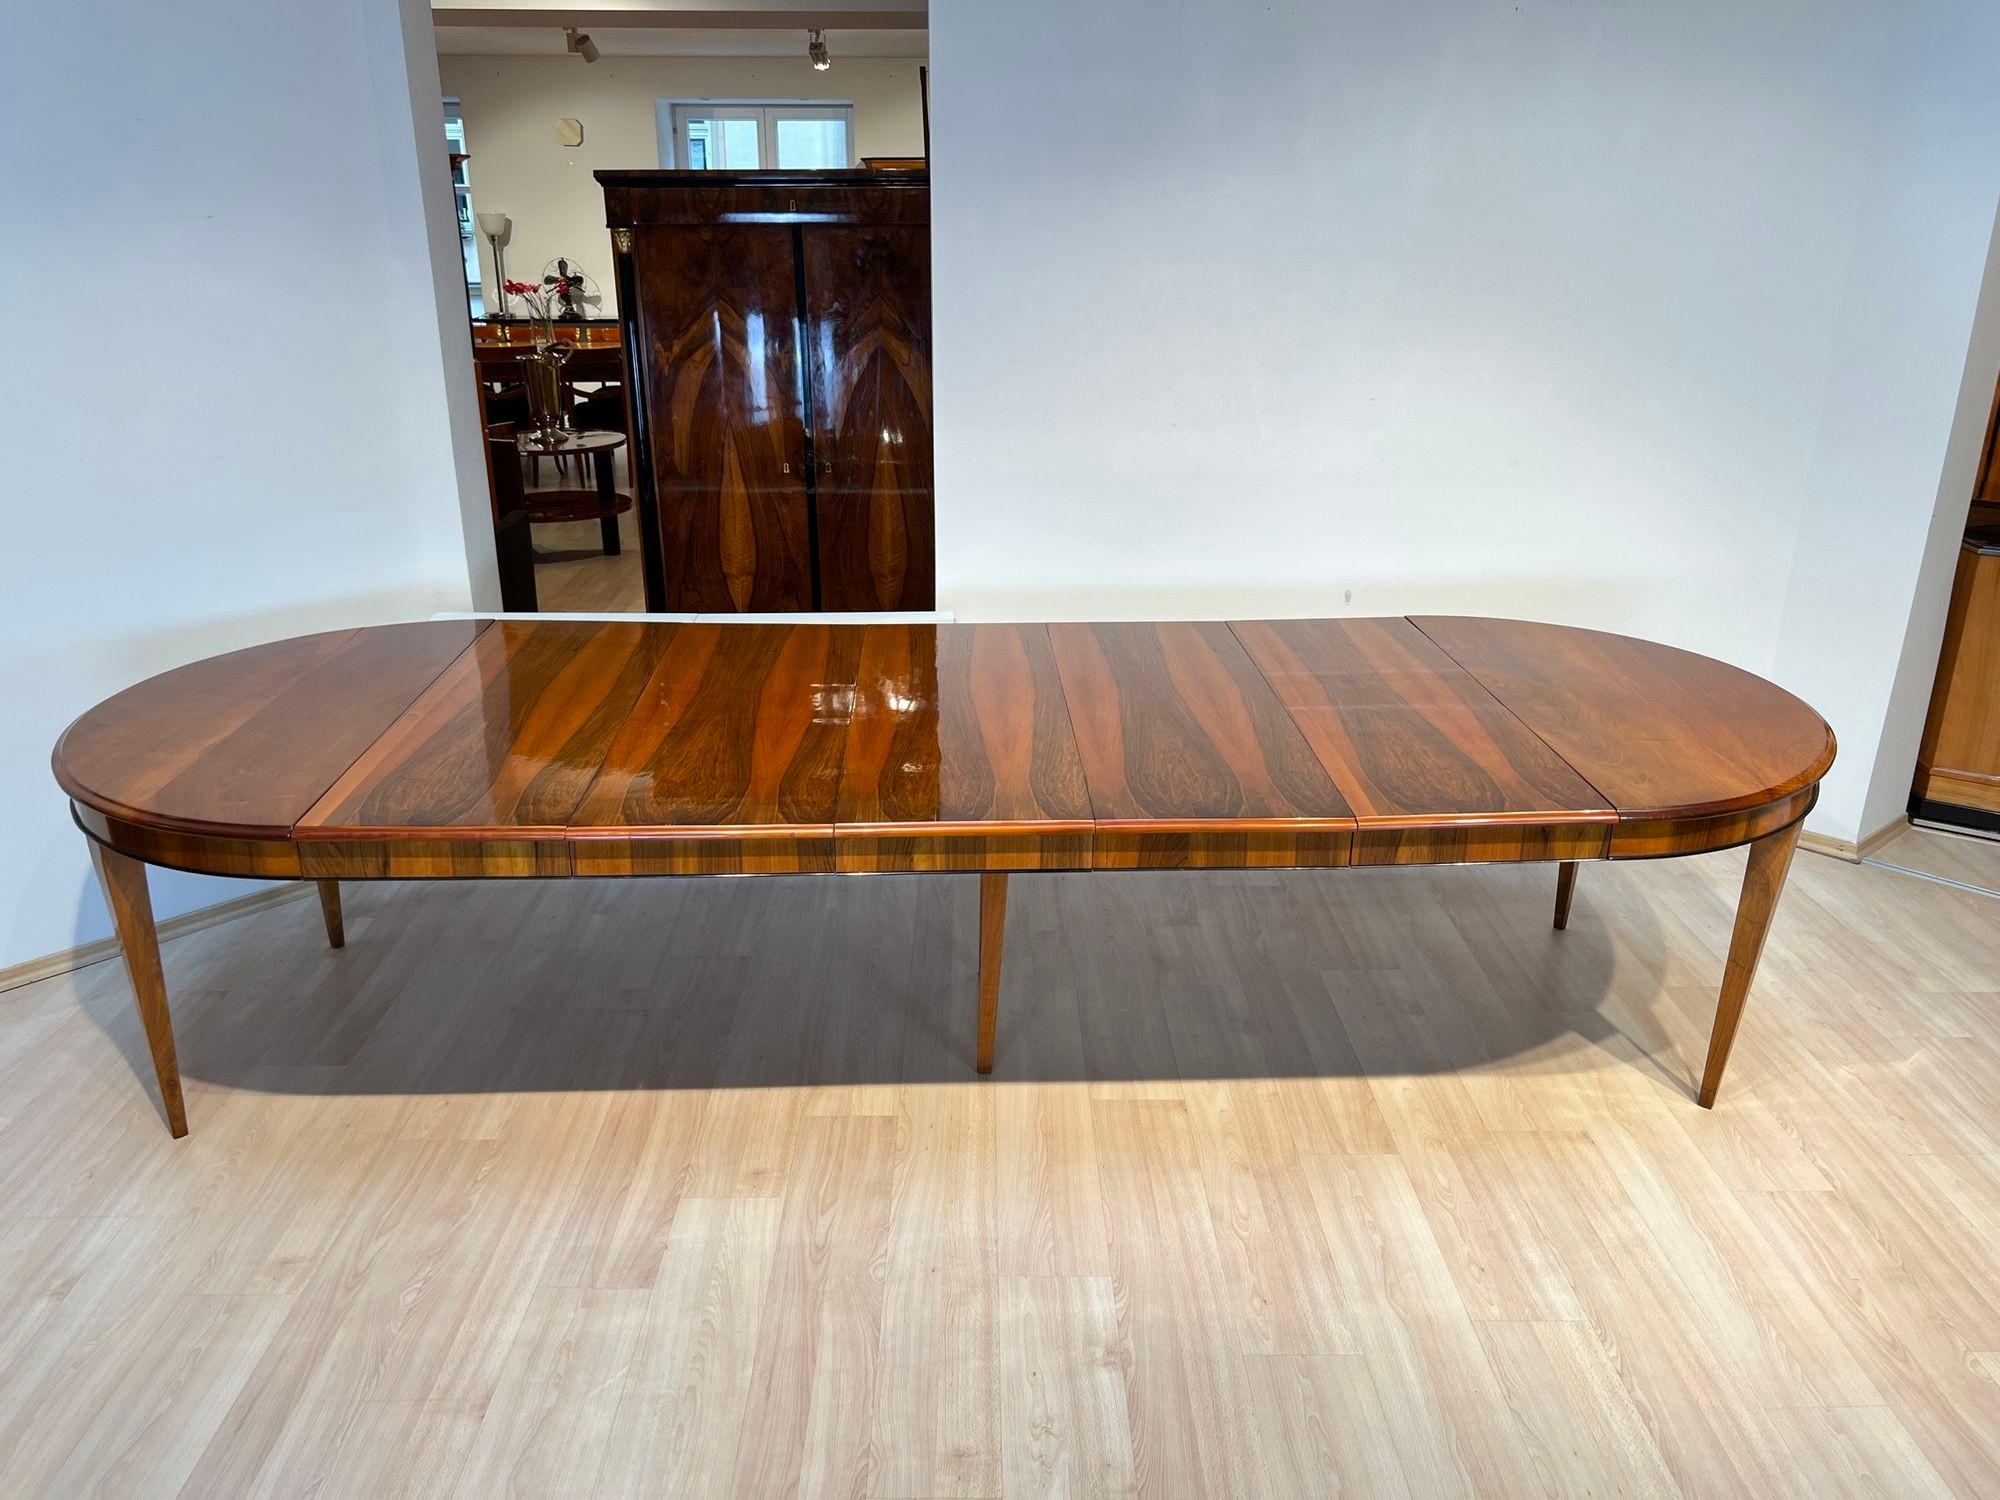 Large neoclassical Biedermeier expandable / extending dining room table in walnut and oak from Southwest Germany around 1830. 

Solid walnut wood side plates and conical square pointed legs. Carved notch all around the top edge and ebonized